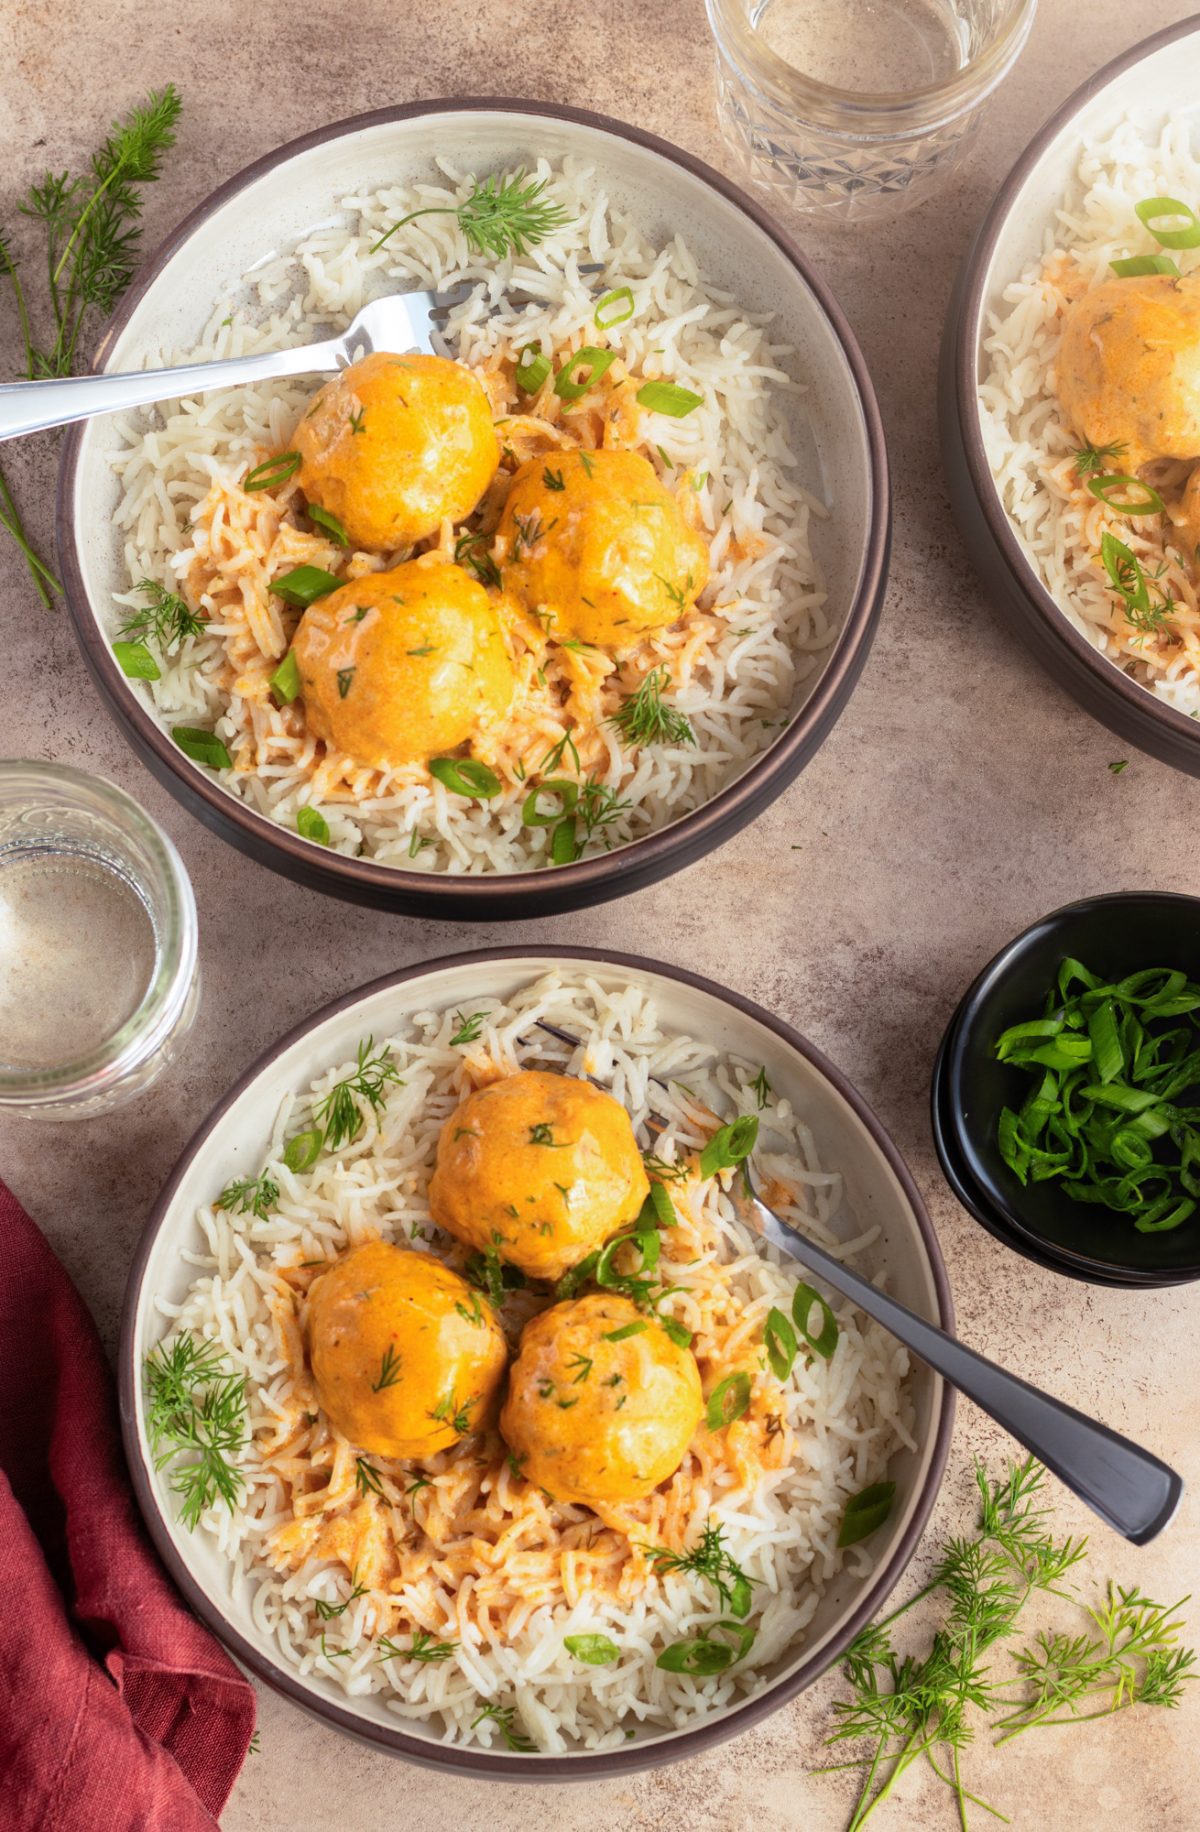 Bowls of buffalo chicken meatballs over rice.